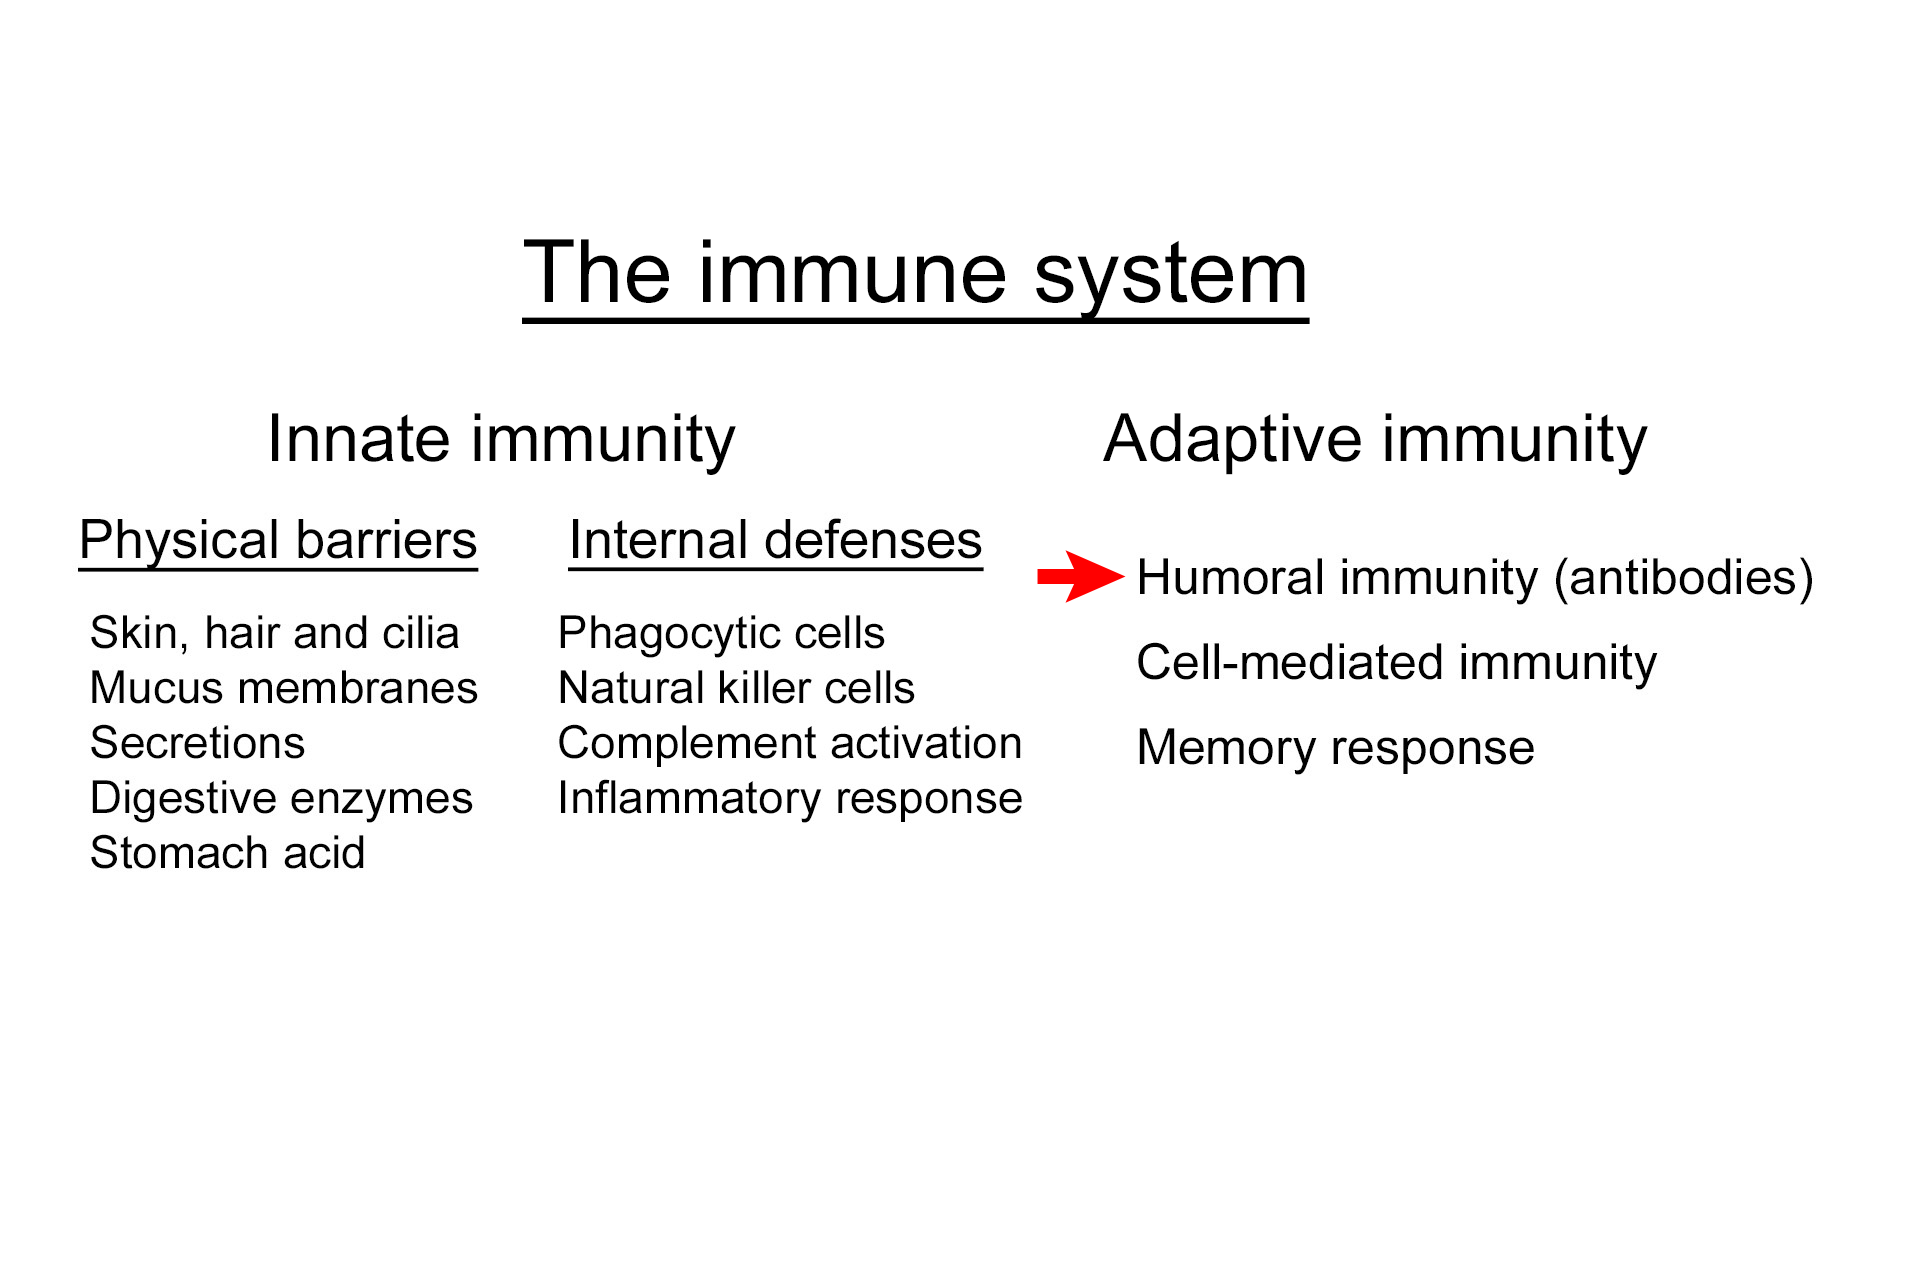  -- Humoral immunity > <p>Humoral immunity entails the secretion of antibodies (immunoglobulins) by activated B lymphocytes.  Antibodies are multimeric proteins that recognize and bind to specific antigens.  They can inactivate viruses and microbial toxins, as well as marking invading pathogens for destruction by phagocytic cells.</p>
